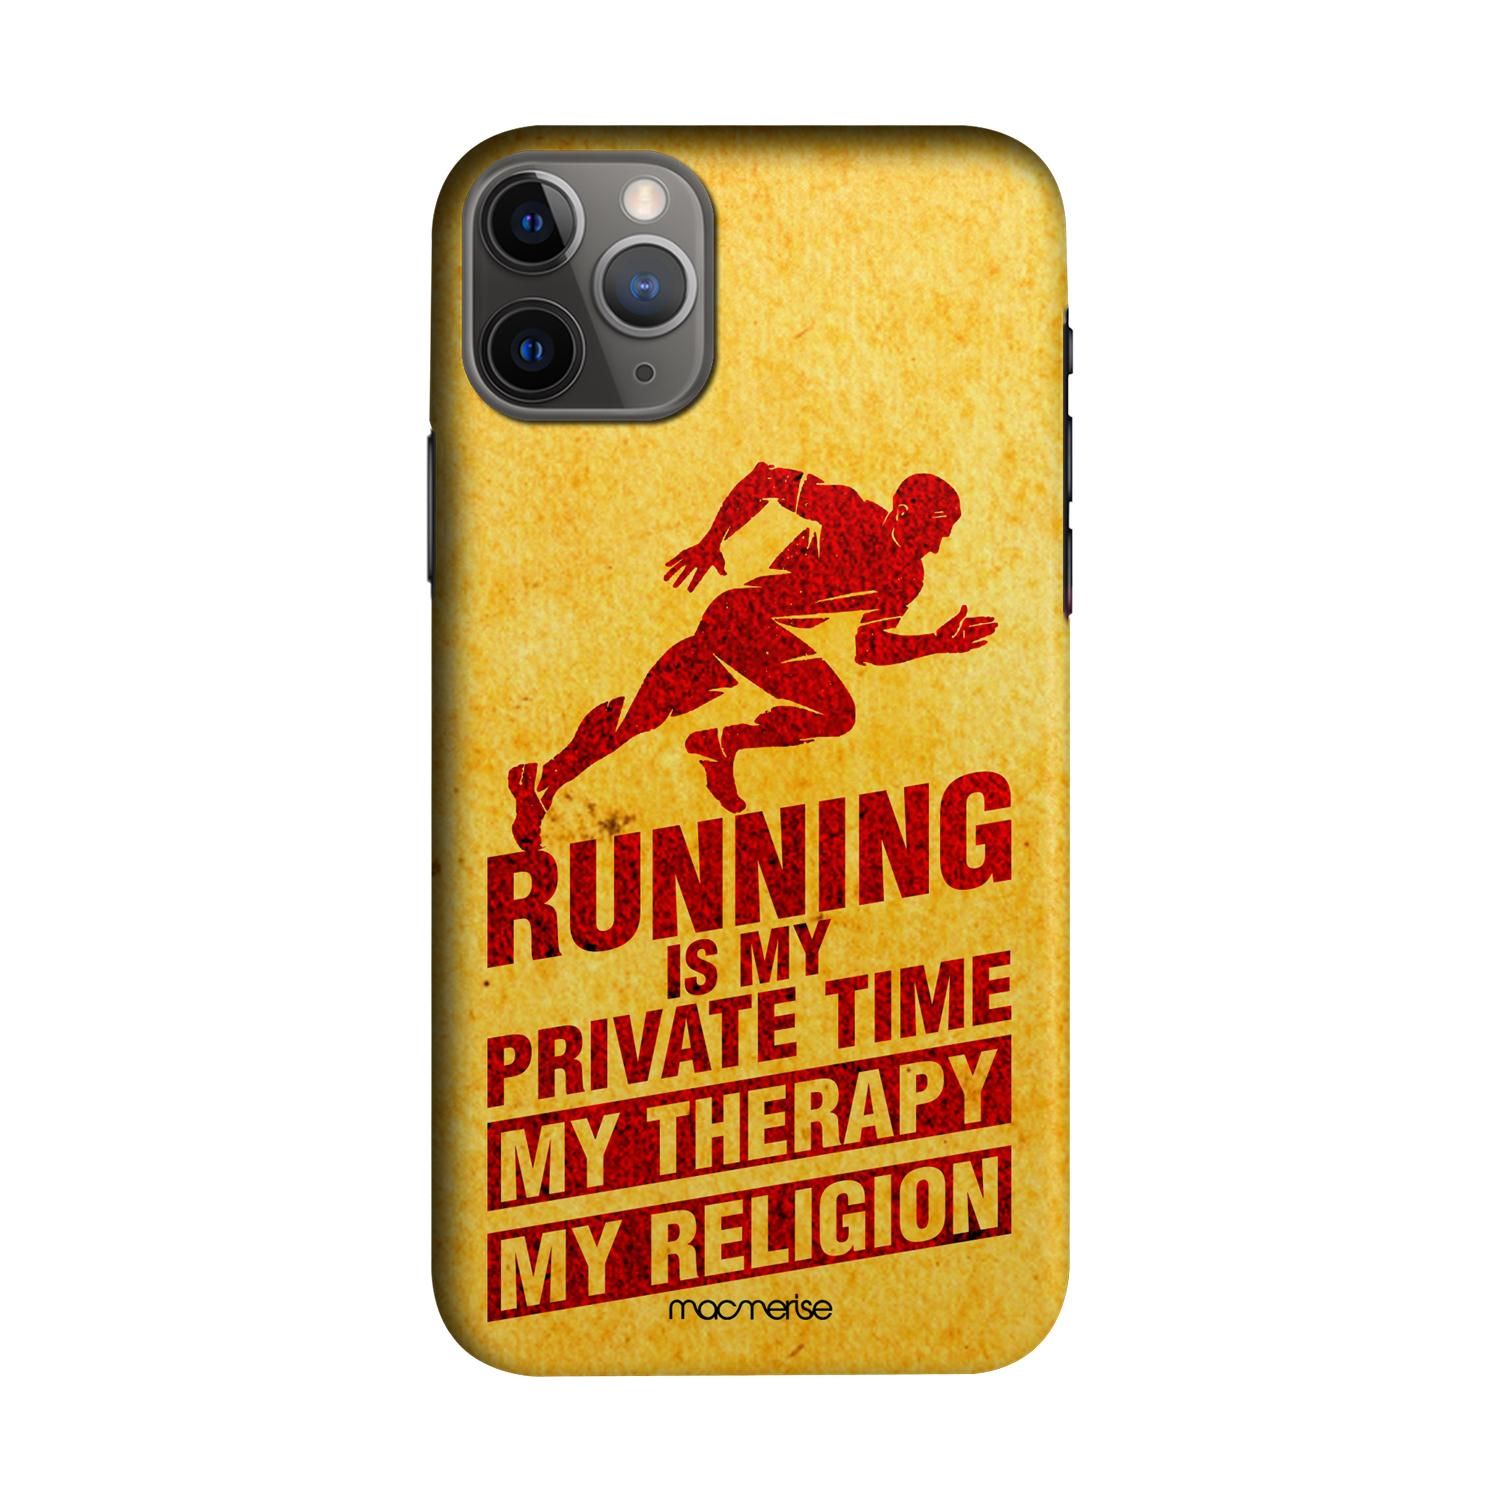 Buy Religion Of Running - Sleek Phone Case for iPhone 11 Pro Max Online